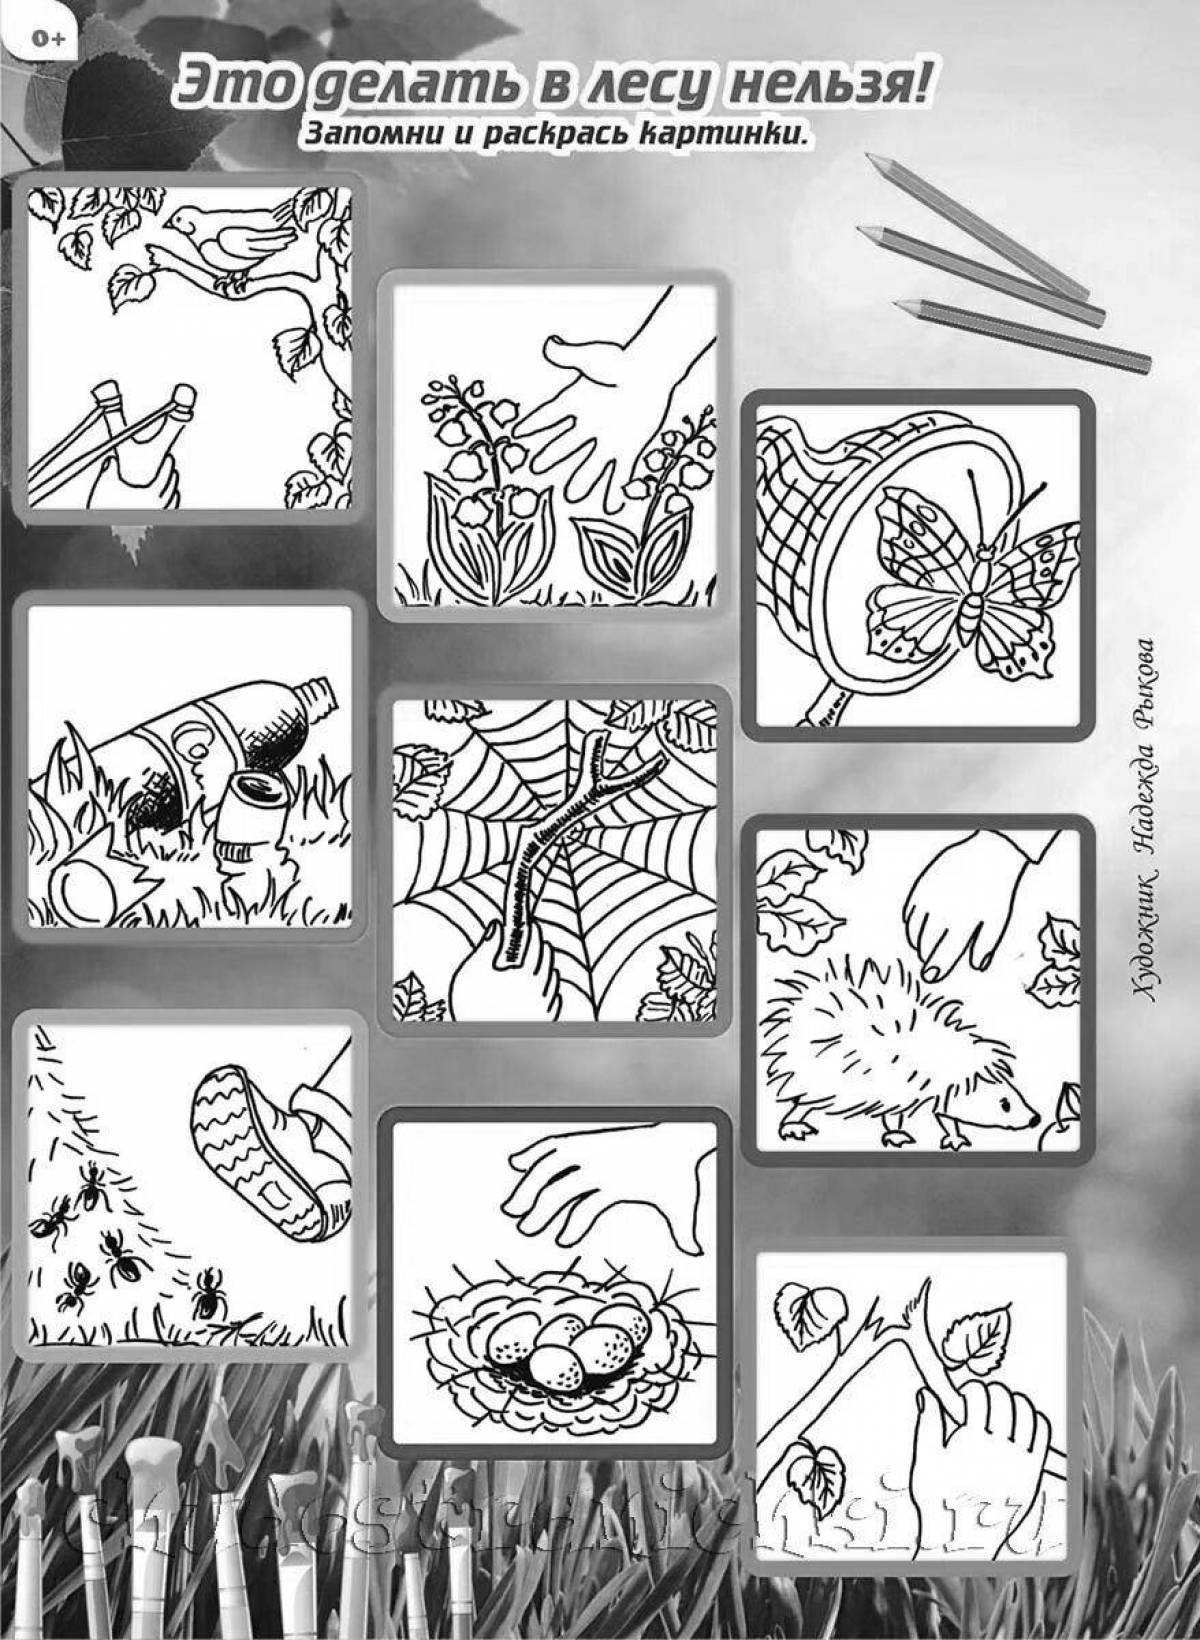 Inspirational environmental signs coloring pages for kids